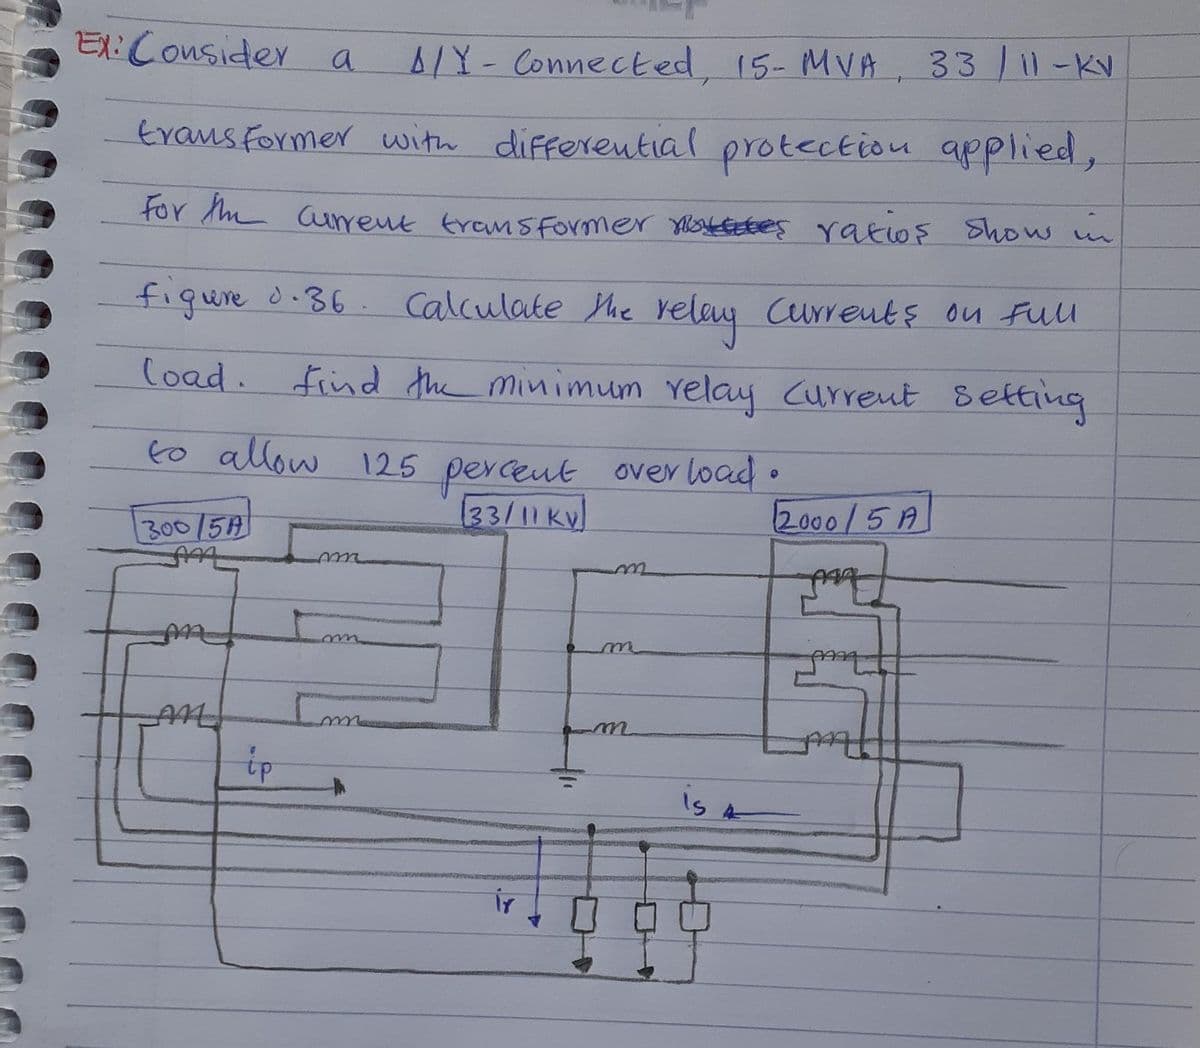 Ex: Consider a
A/Y - Connected, 15-MVA, 33 / 11 -KV
transformer with differential protection applied,
For the current transformer notes ratios show in
figure d.36. Calculate the relay currents on full
load. Find the minimum relay Current setting
to allow 125 percent overload.
33/11 Kv
300/5A
2000/5A
faz
m
AAAA
E
C
An
tp
ir
m
is